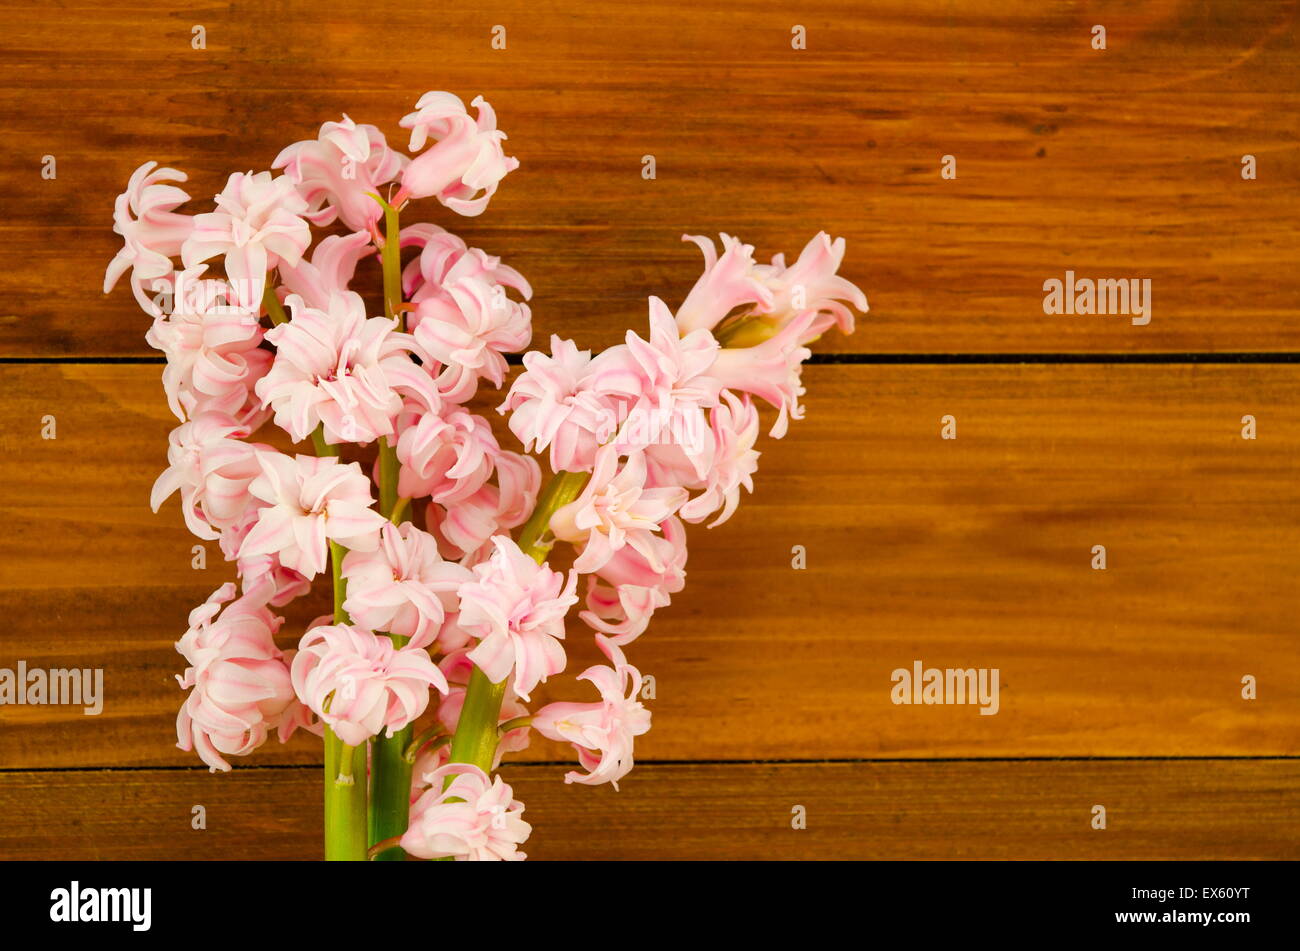 Background with fresh flowers hyacinths and wooden backgound.  Place for text. Stock Photo